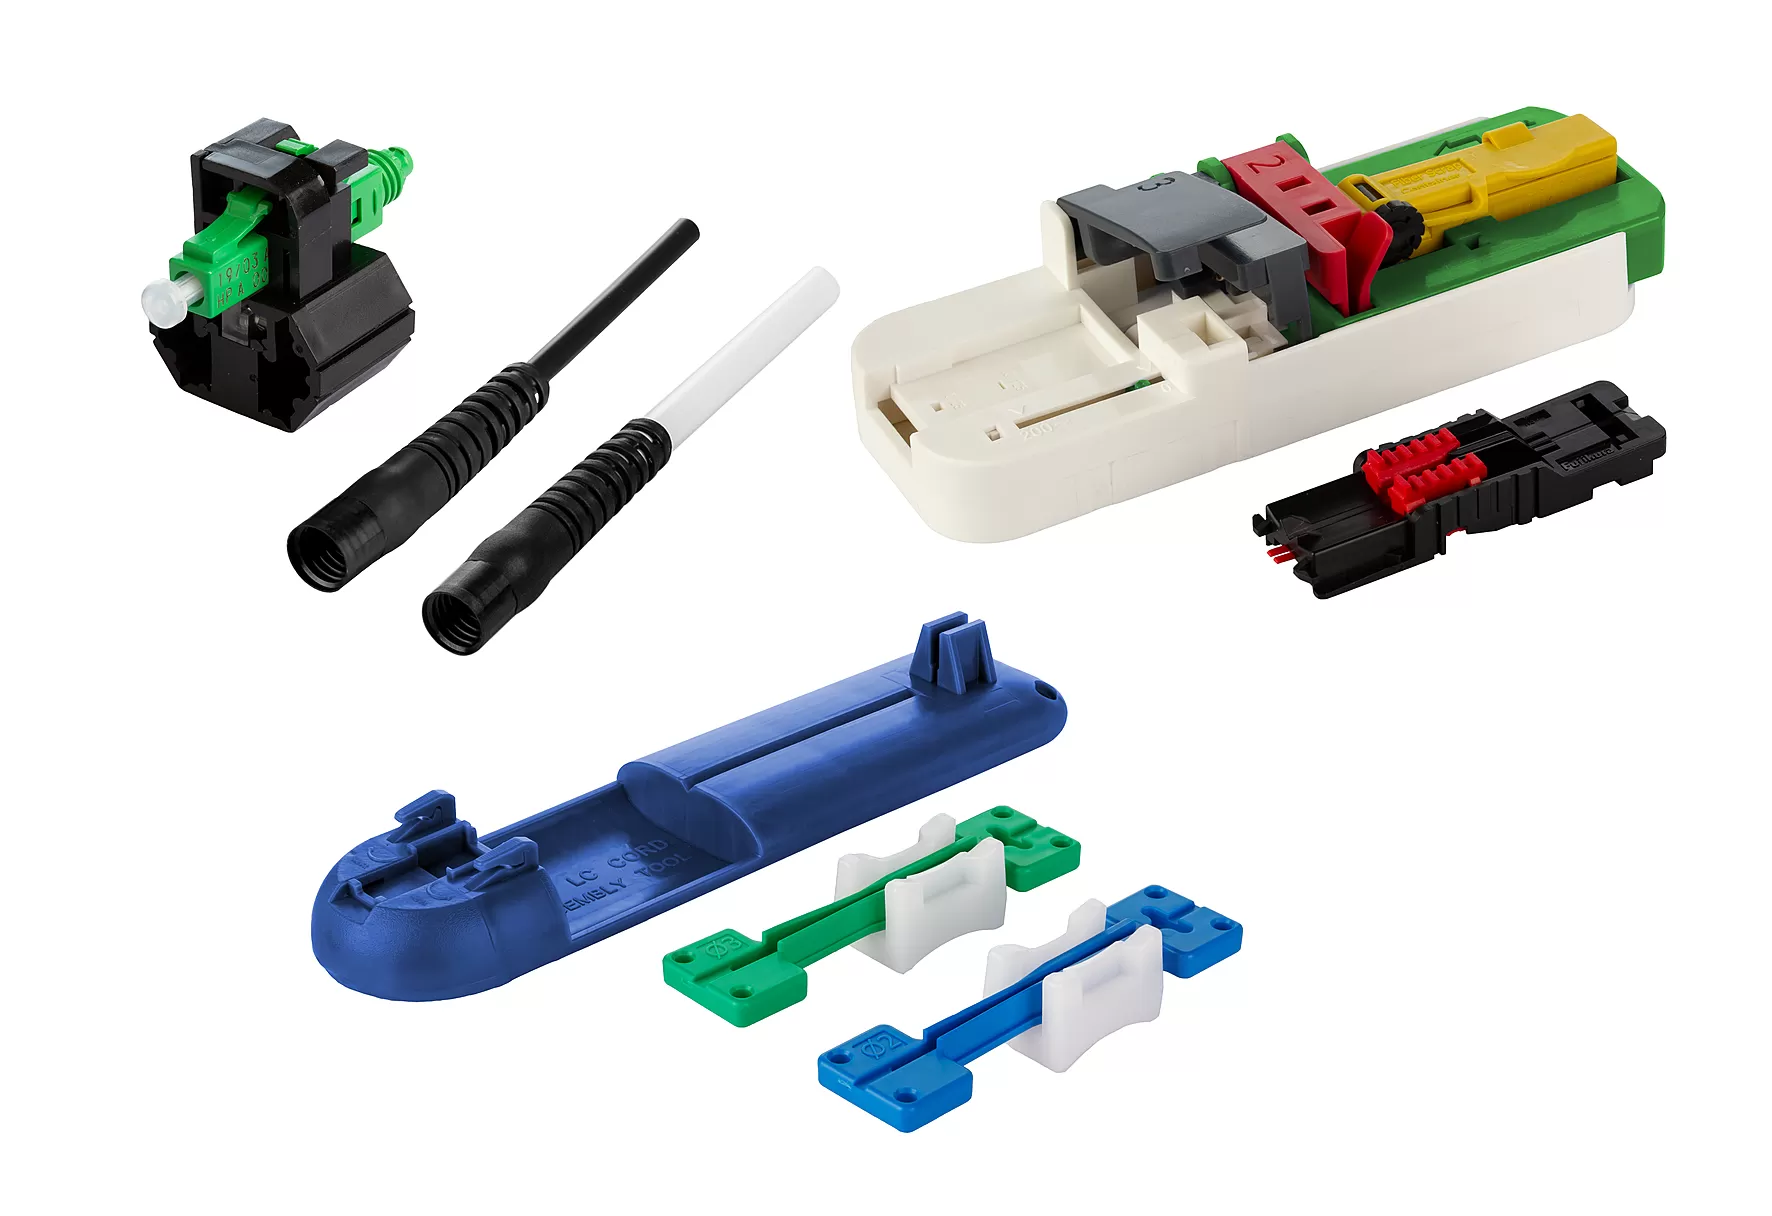 Metz Connect OpDAT FAST Hybrid Steckerbausatz LC APC OS2 20 Stück für Kabel Ø 2,0 + 3,0 mm inkl. Cleaver-Set, Faser-Guide und Kabelassemblierungsset 1509QKJA002C-E